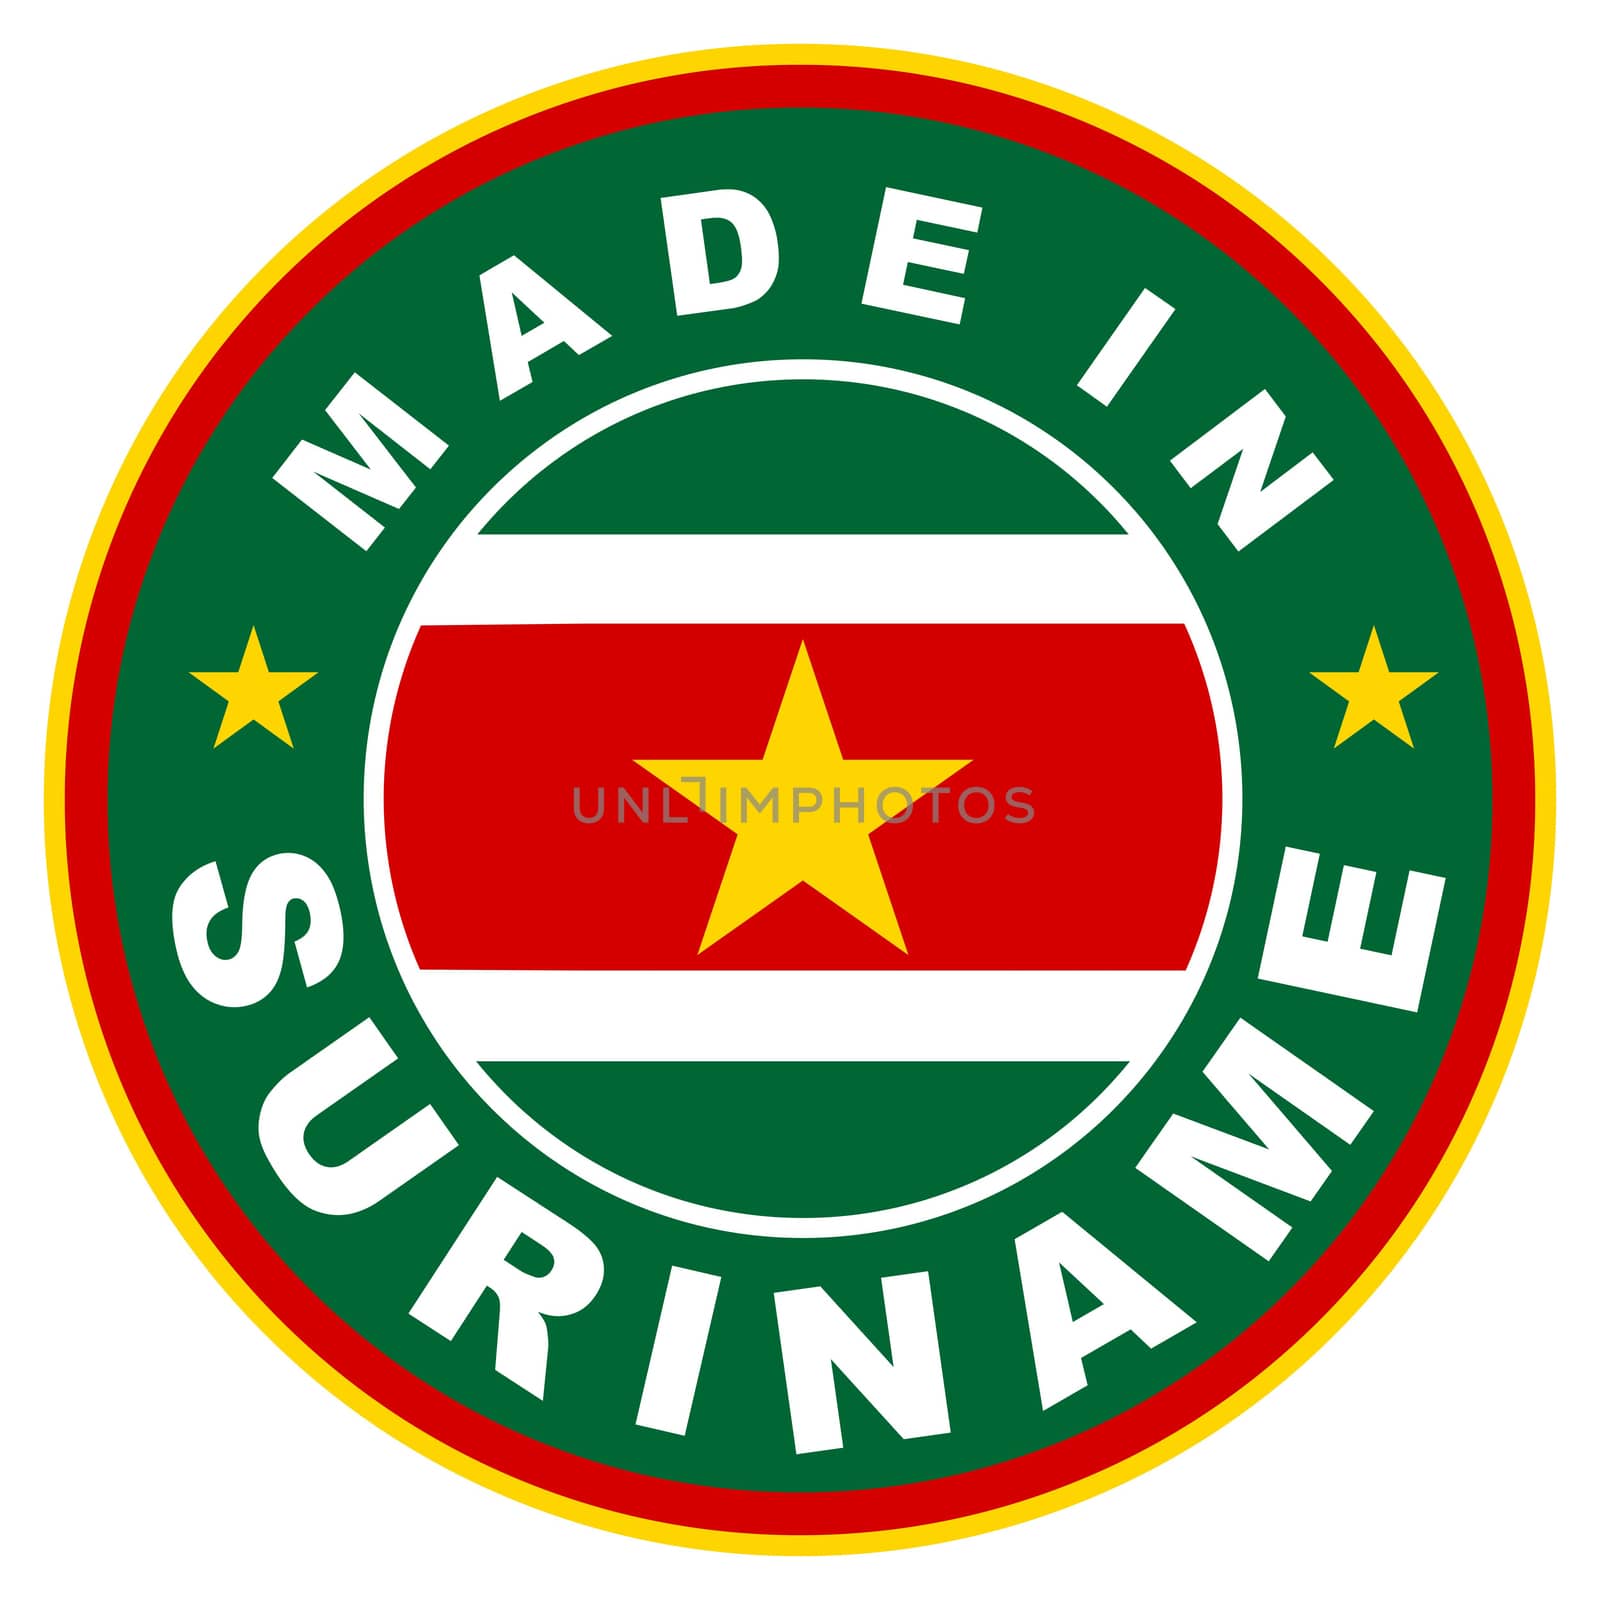 very big size made in suriname label illustratioan